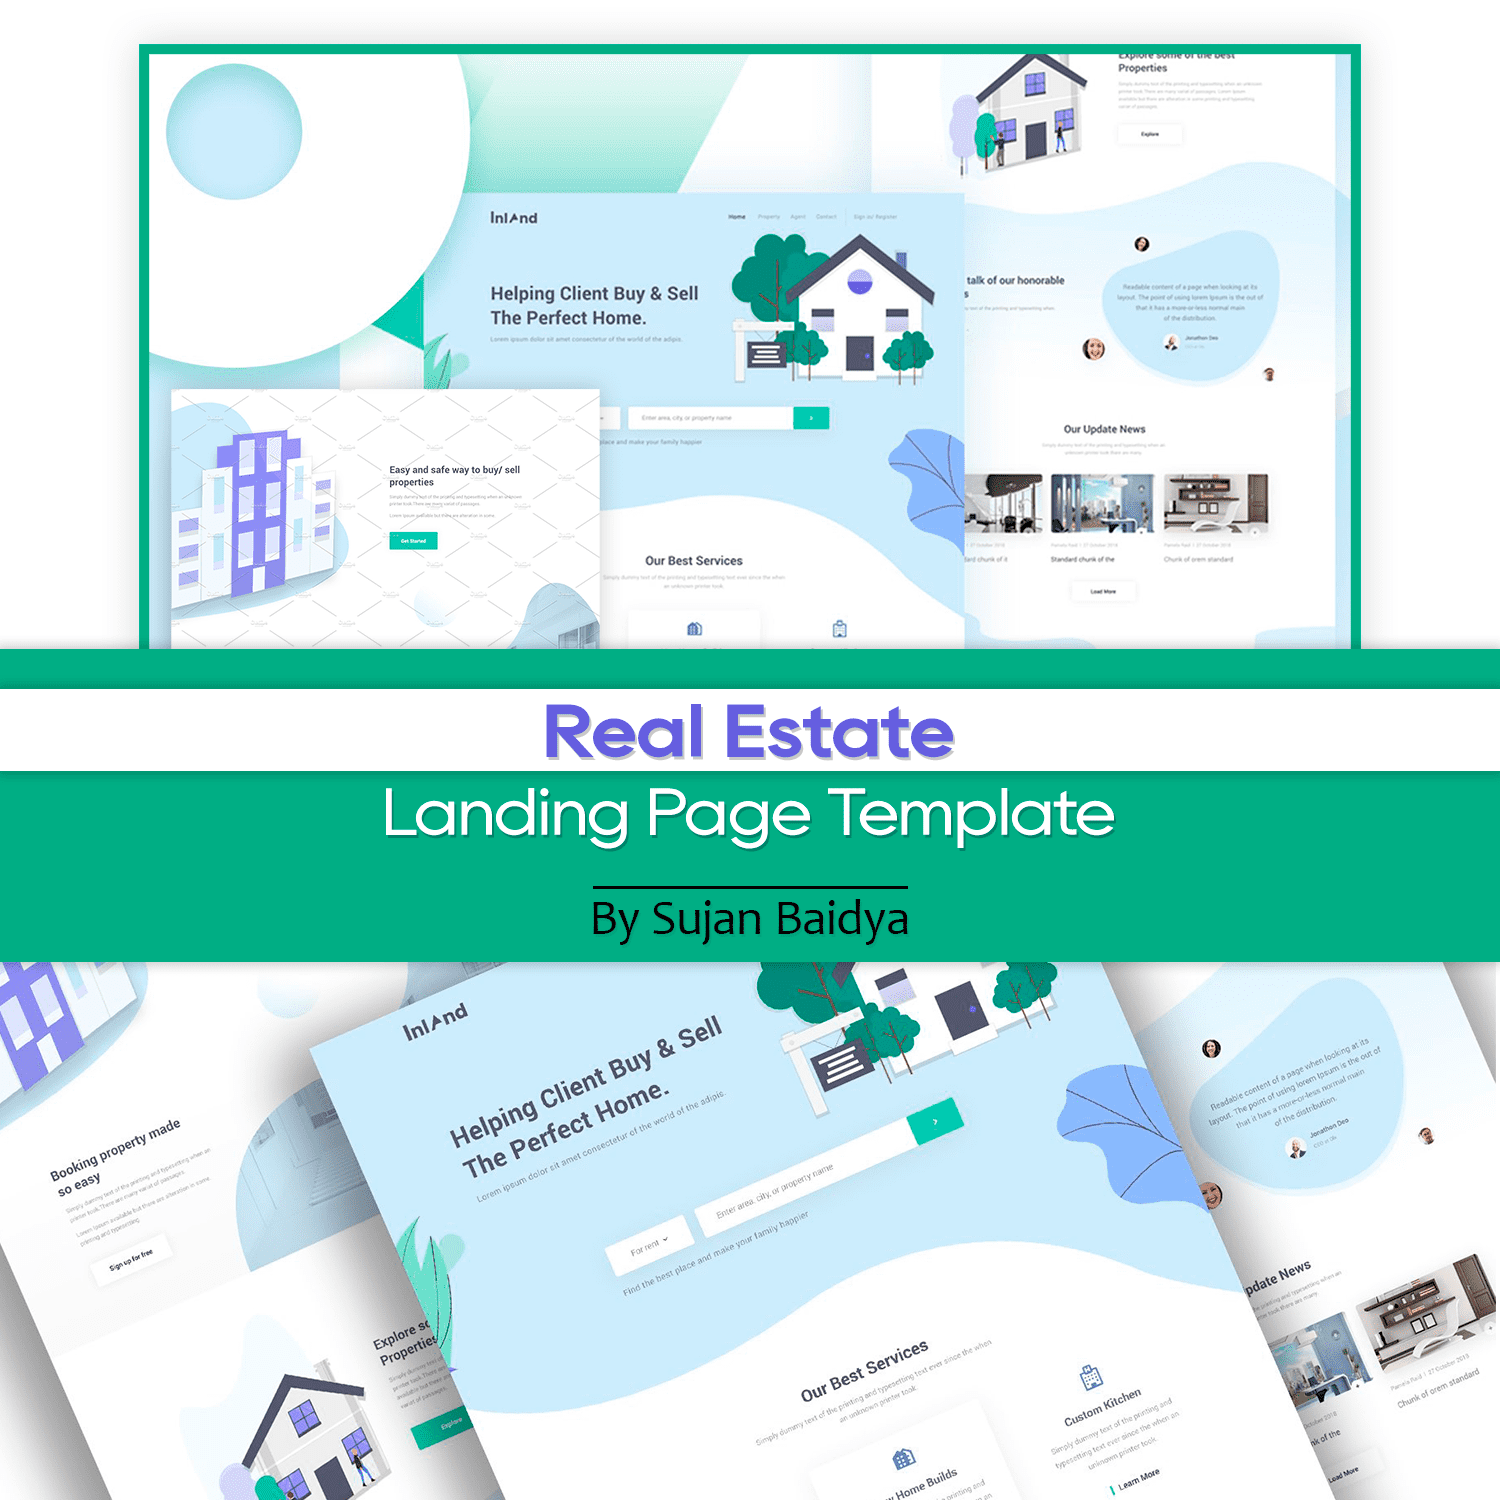 Real Estate Landing Page Template cover.